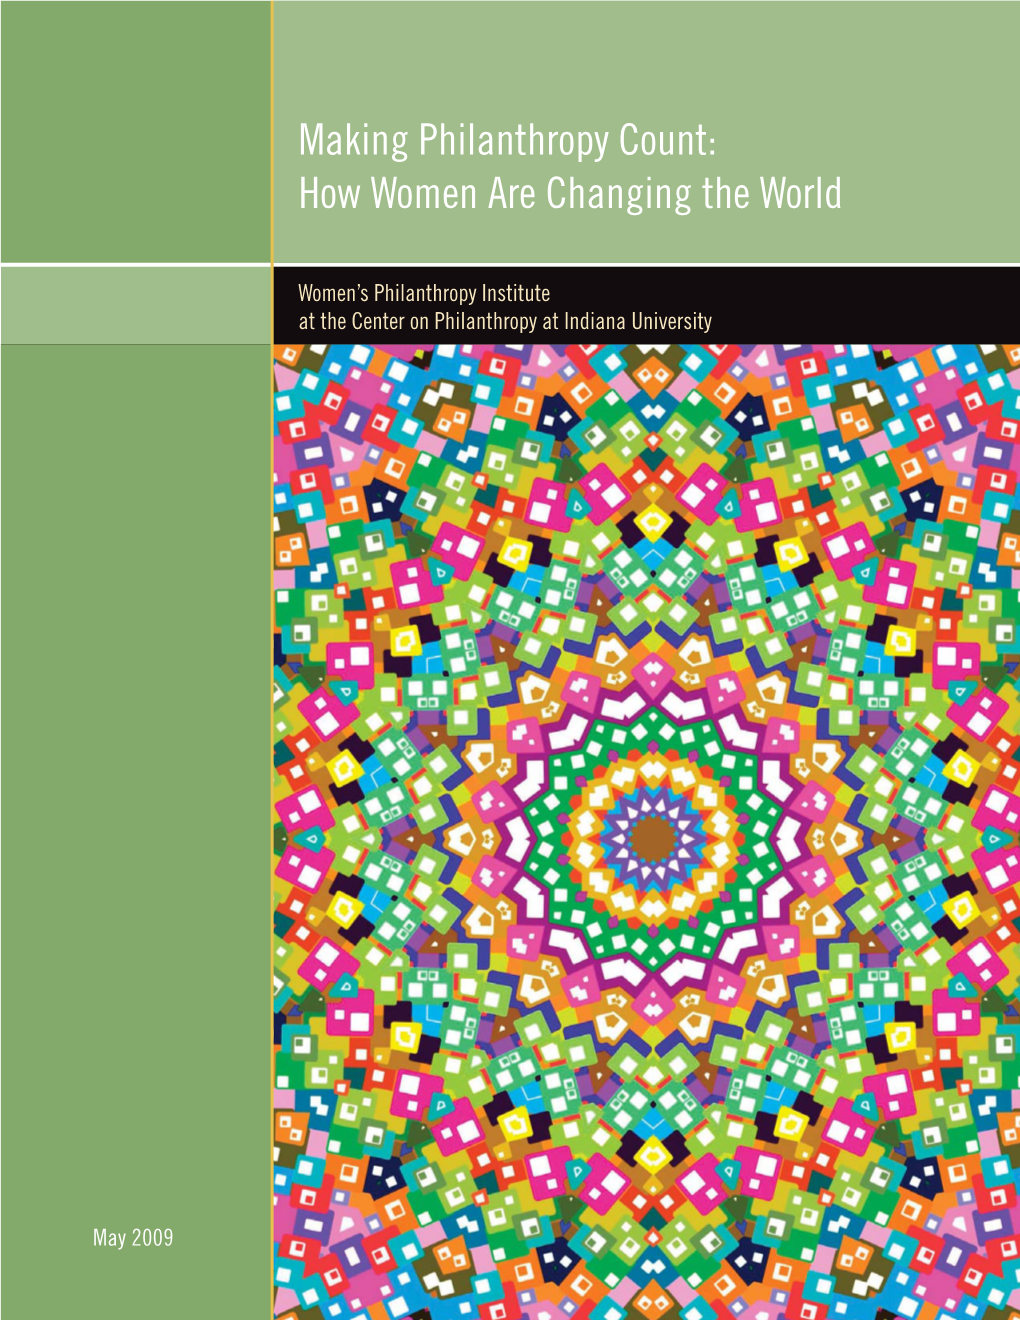 Making Philanthropy Count: How Women Are Changing the World